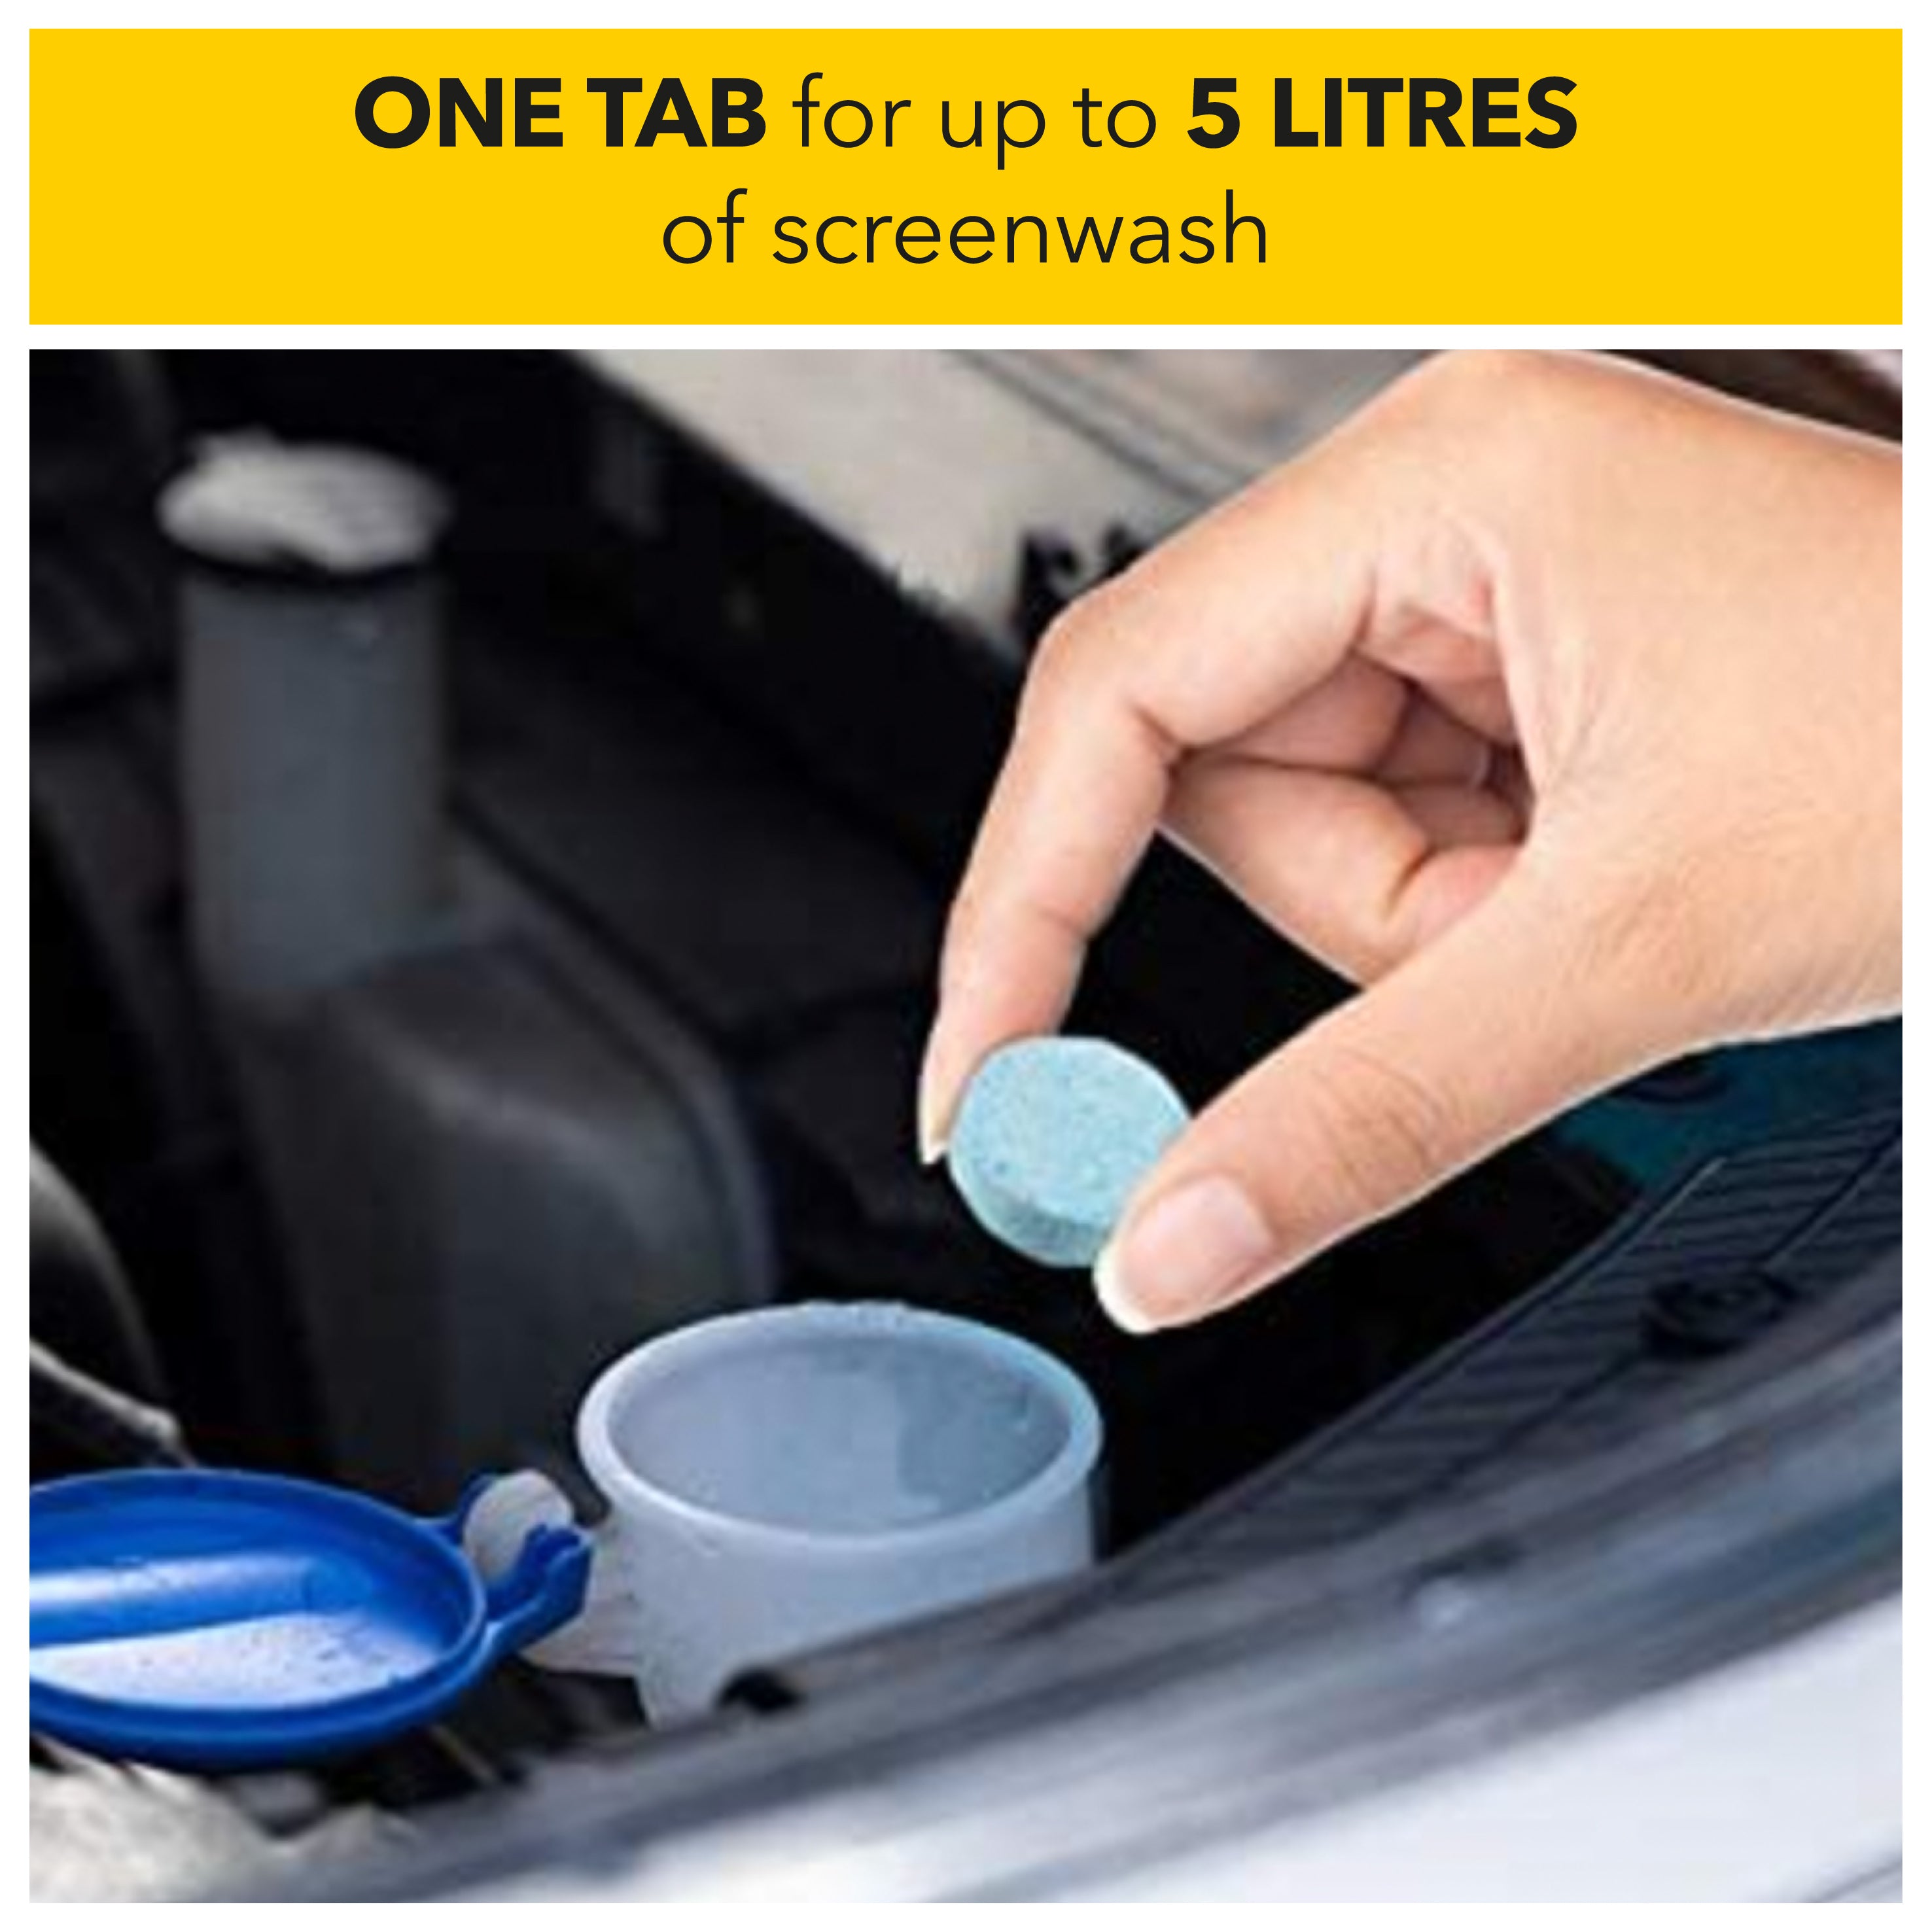 one tab makes up to 5 litres of screenwash